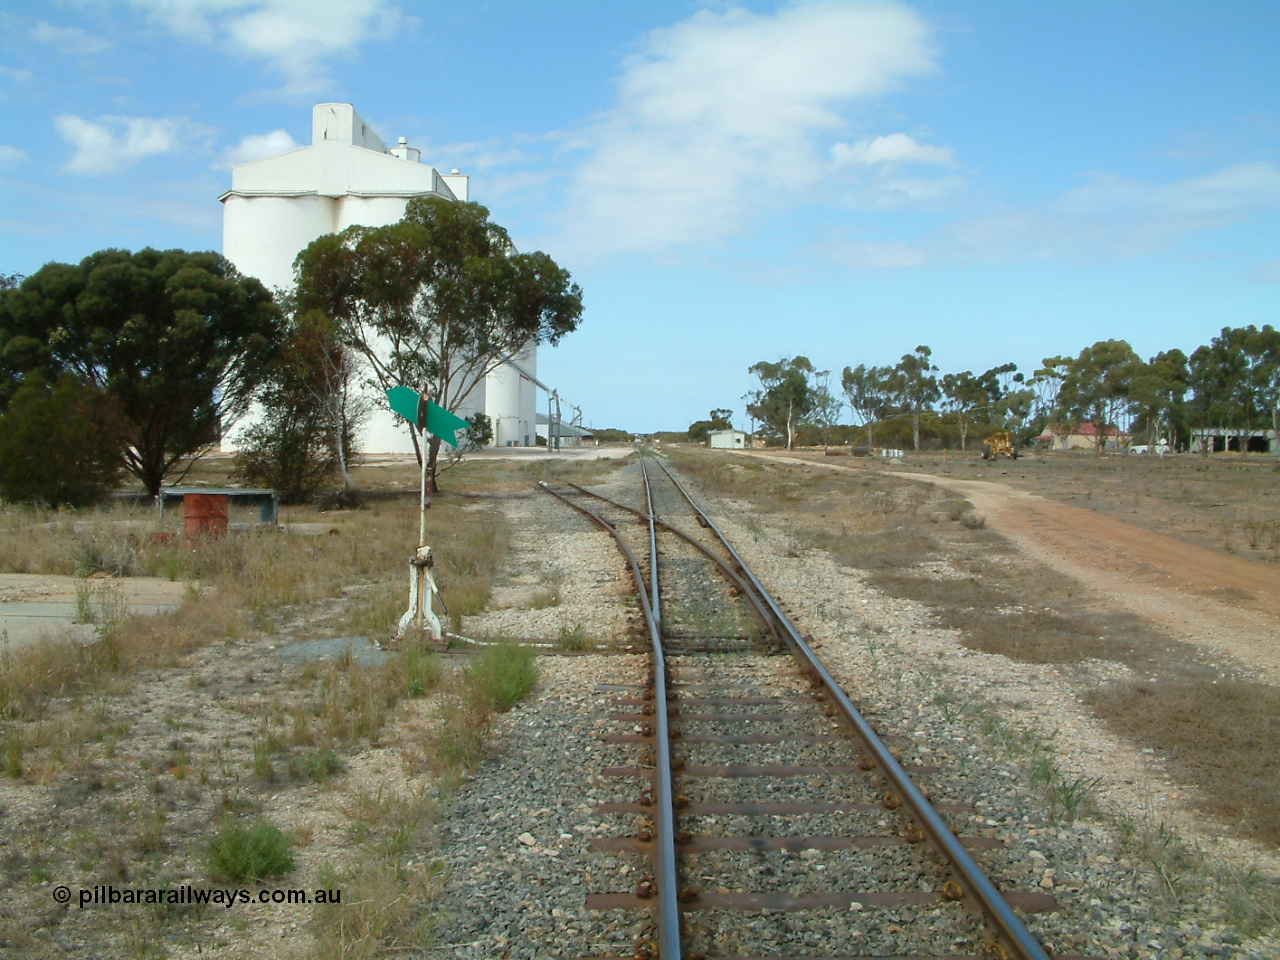 030409 124139
Rudall, located at the 172.7 km and opened in July 1913, station overview looking south from the north end, points for grain and goods siding off to the left, station build can be seen in the distance on the right.
